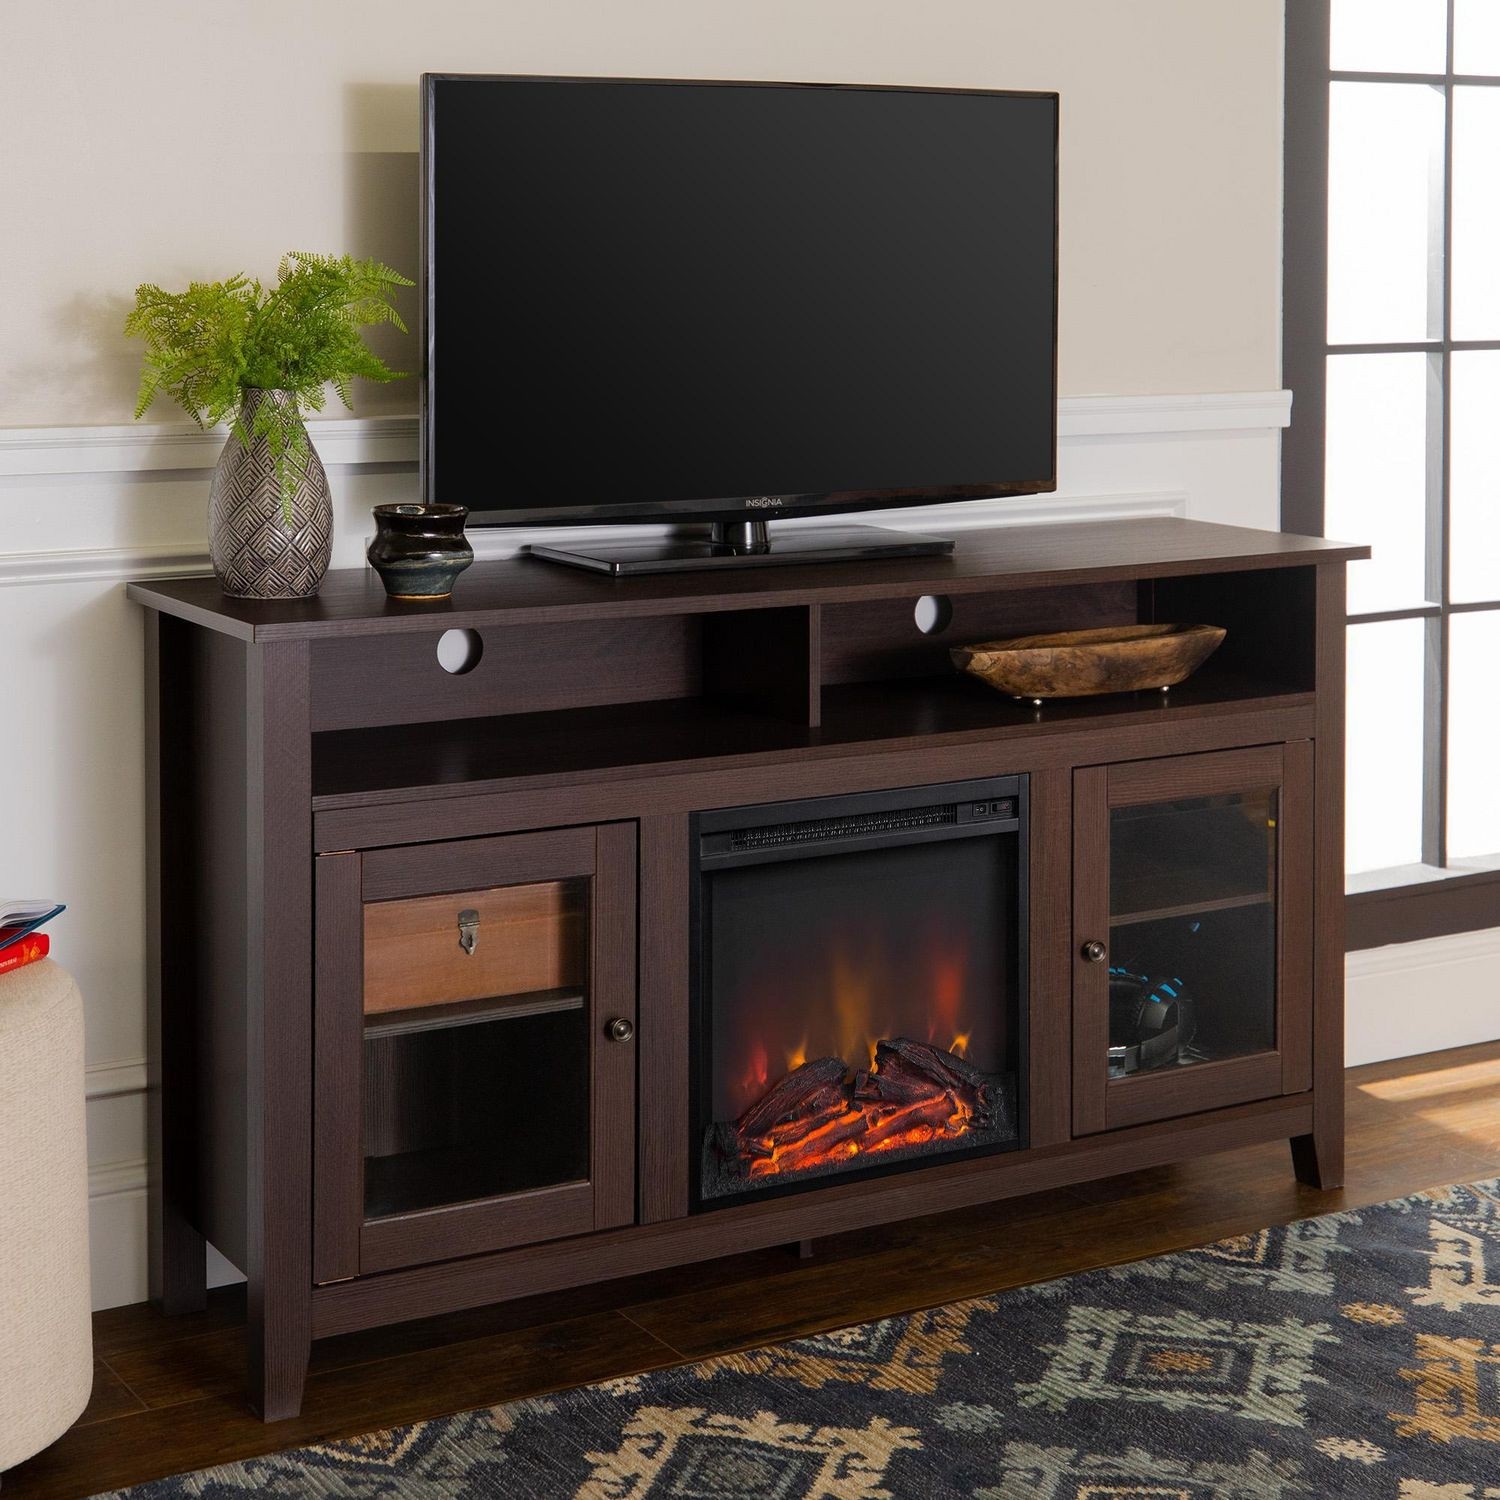 Manor park modern highboy fireplace tv stand for tvs up